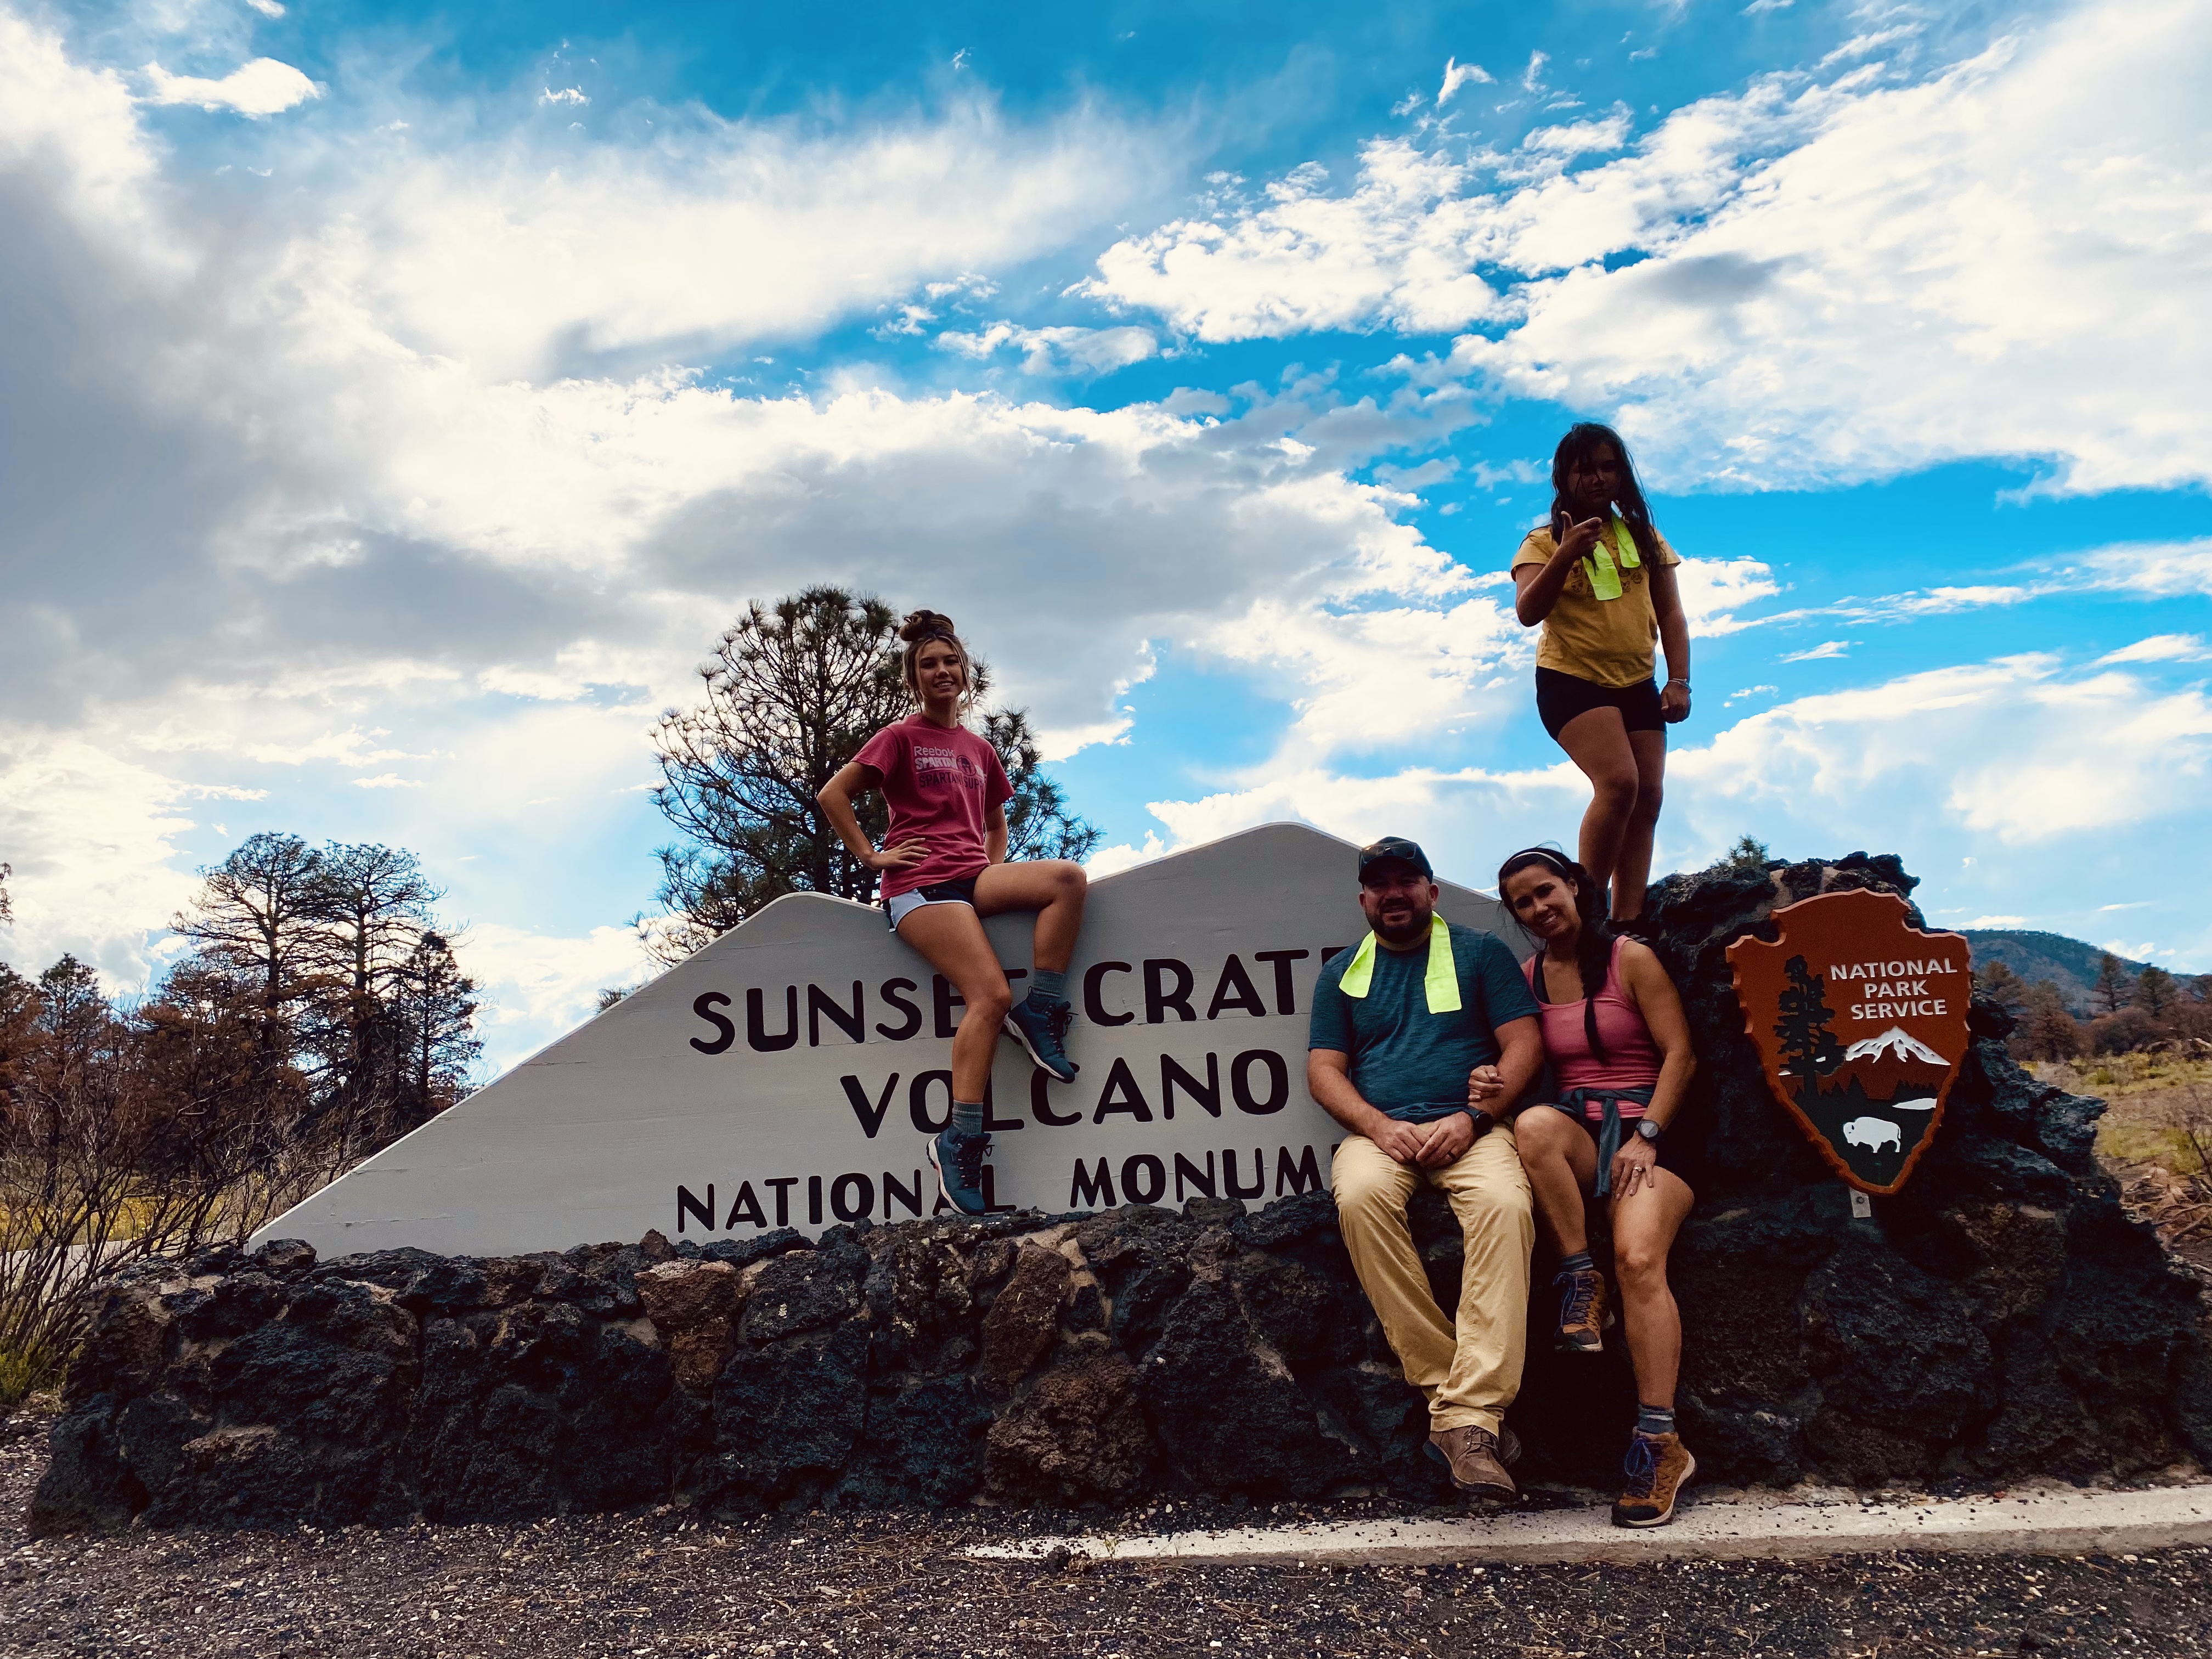 Family pic with sunset crater volcano sign